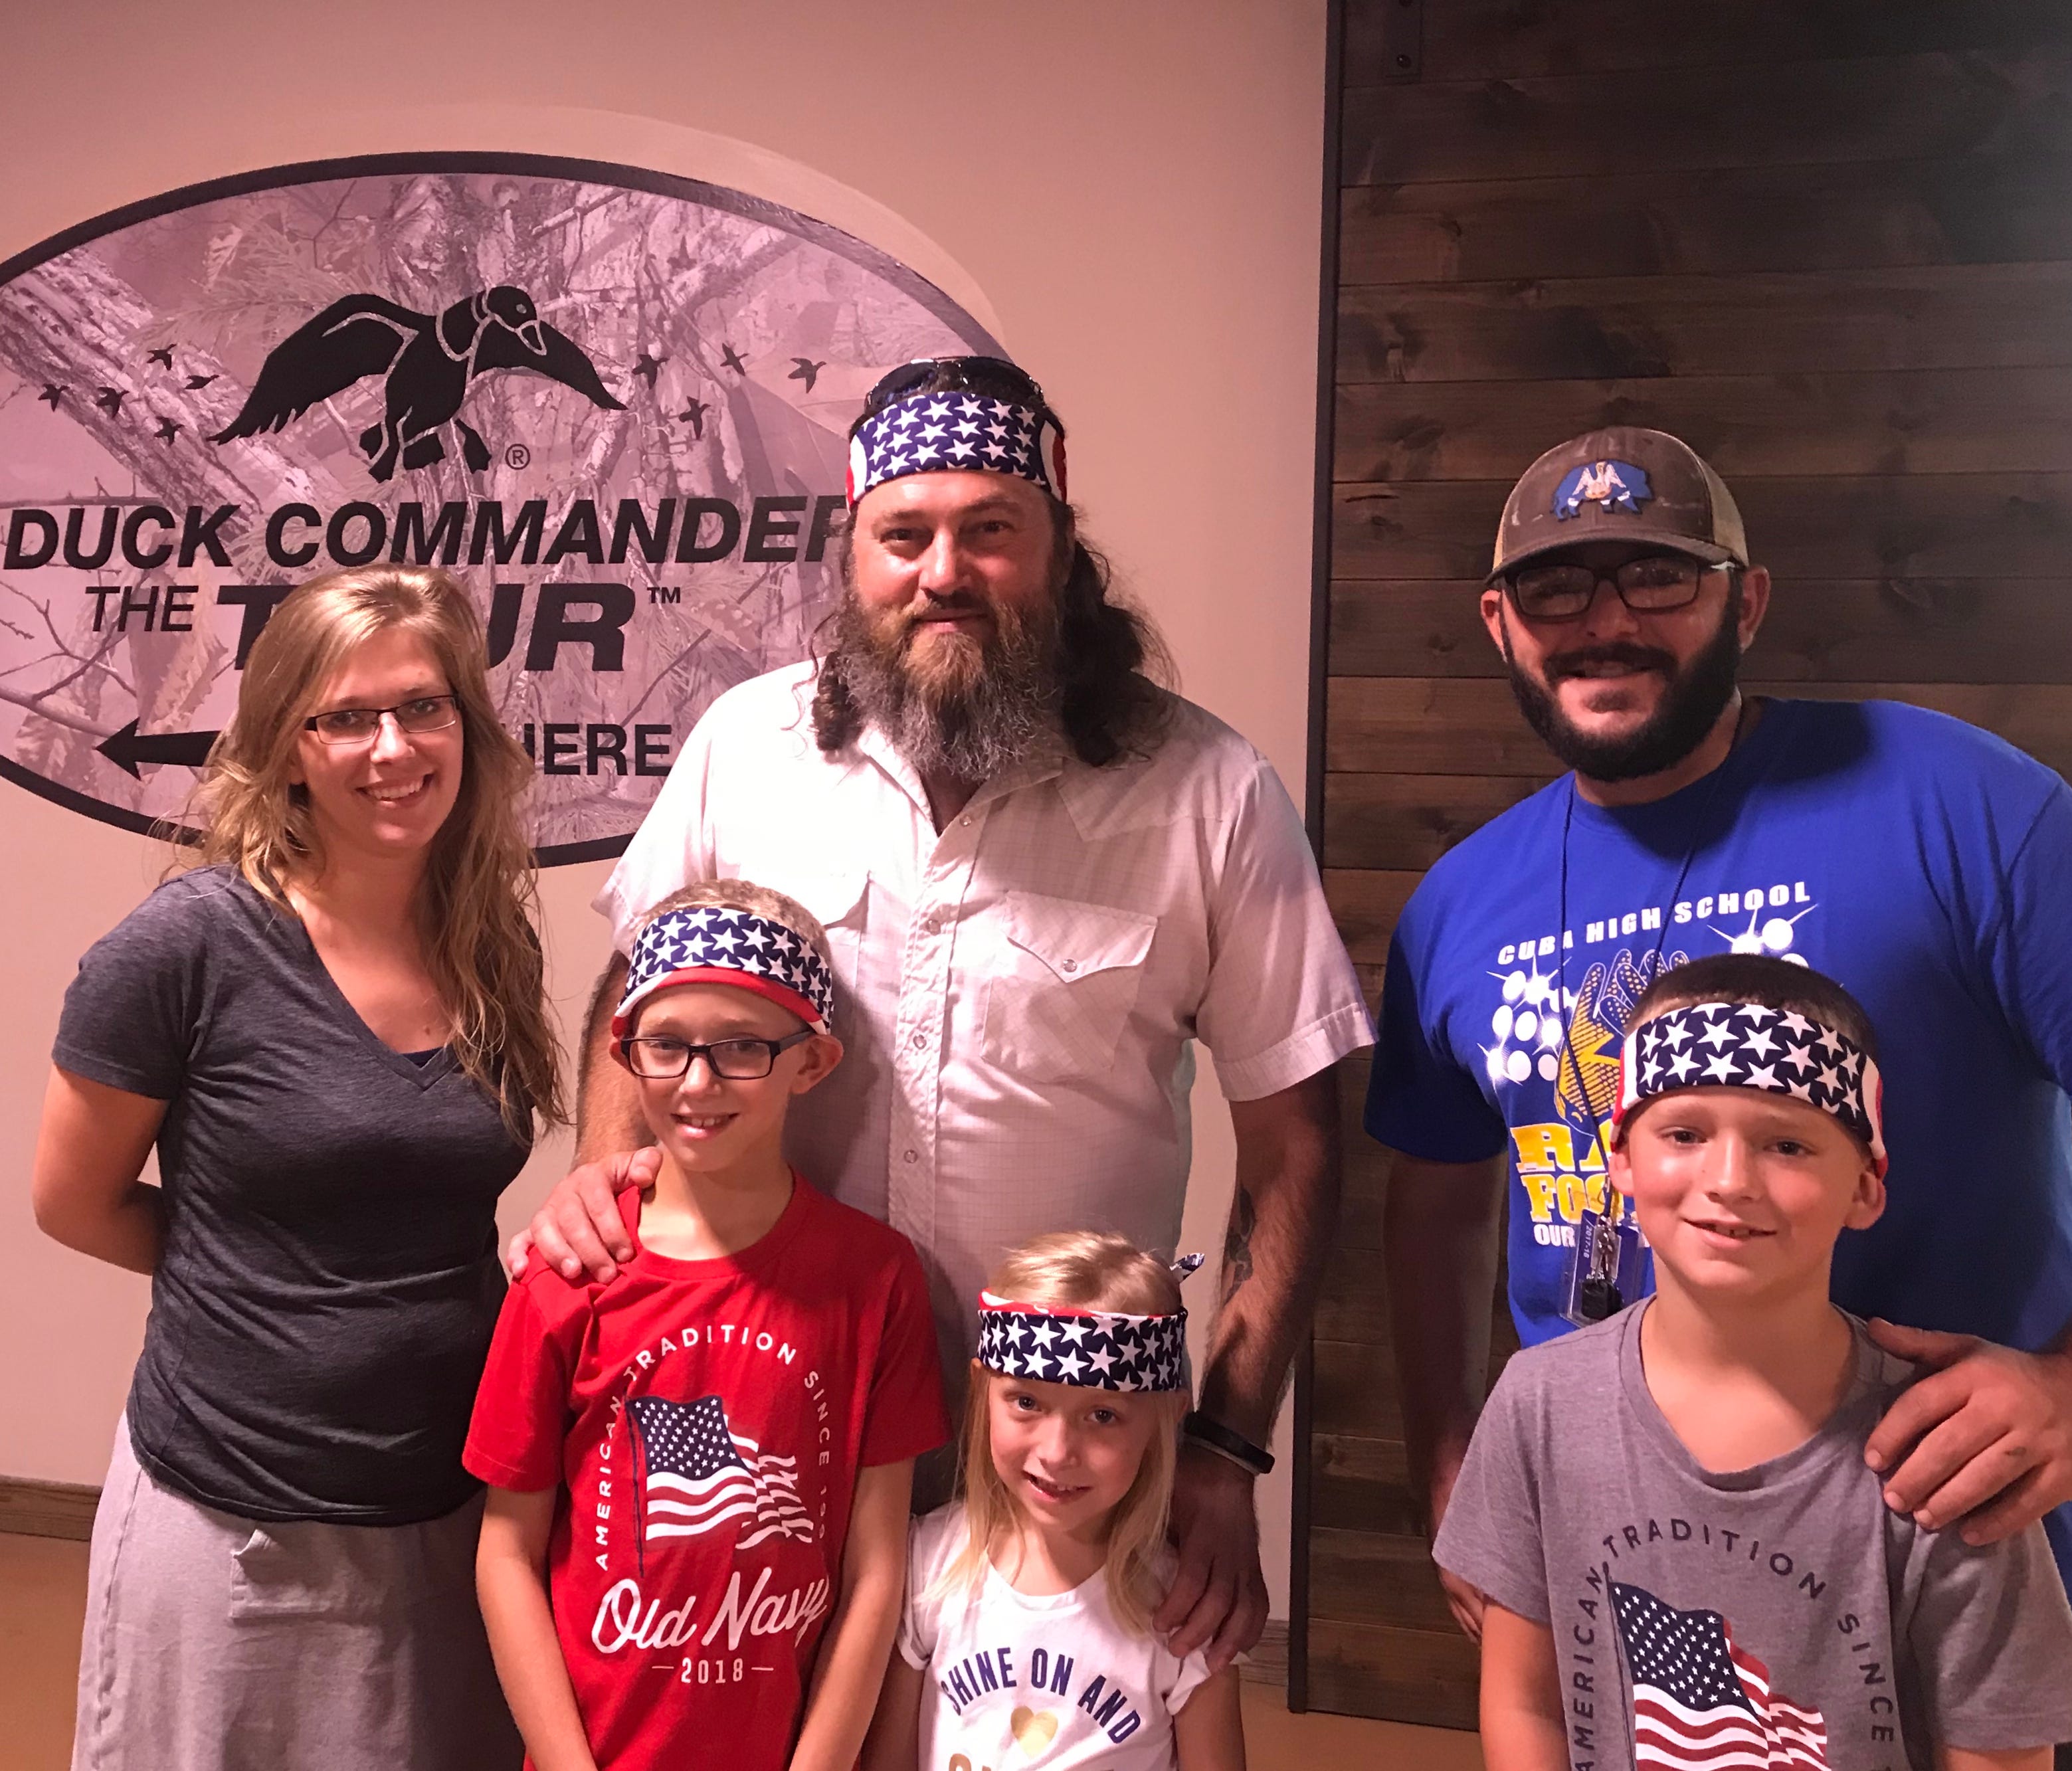 Duck Commander CEO Willie Robertson poses with fans before they entered the Duck Commander The Tour museum in West Monroe., La.